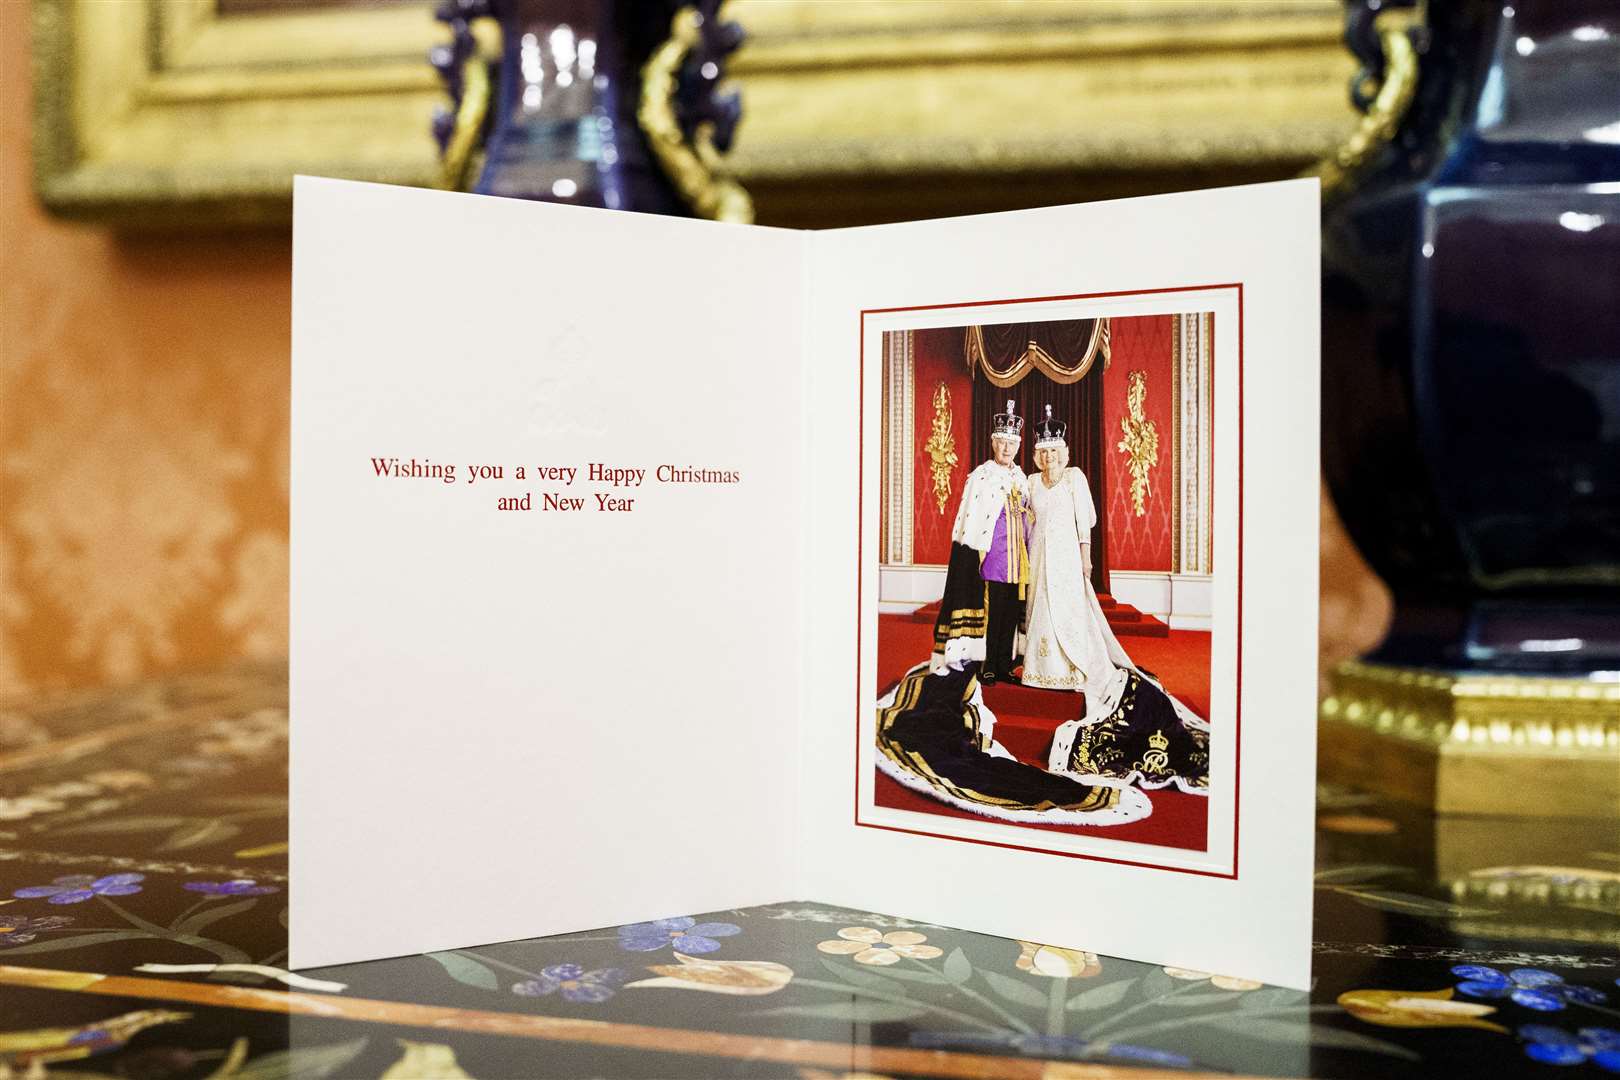 Charles and Camilla have chosen a formal coronation image for their Christmas card (Buckingham Palace/Hugo Burnand/PA)